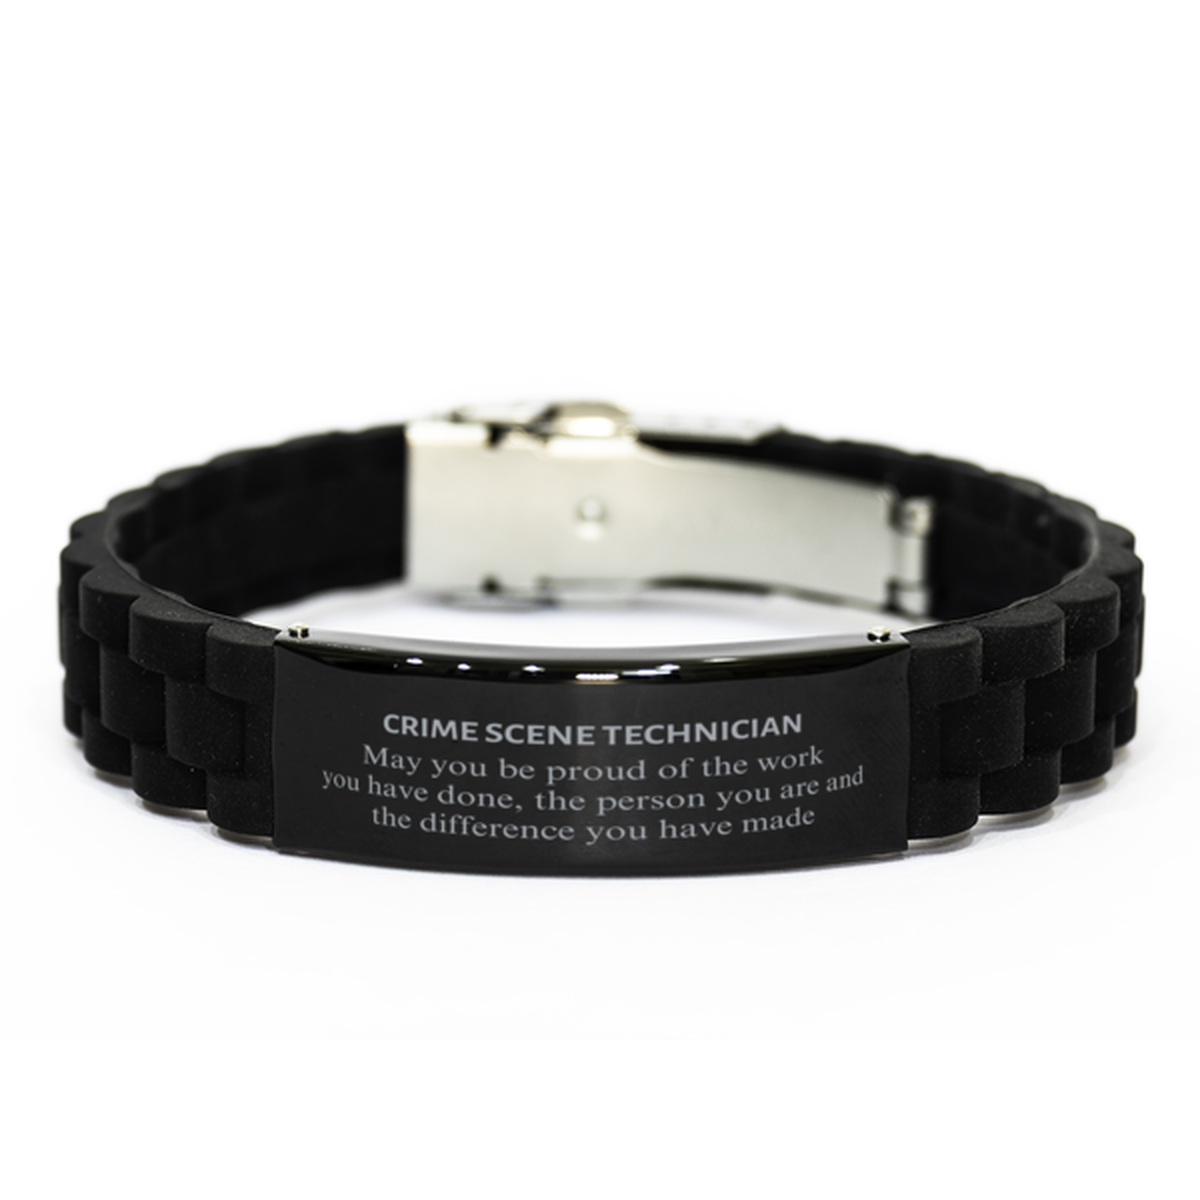 Crime Scene Technician May you be proud of the work you have done, Retirement Crime Scene Technician Black Glidelock Clasp Bracelet for Colleague Appreciation Gifts Amazing for Crime Scene Technician